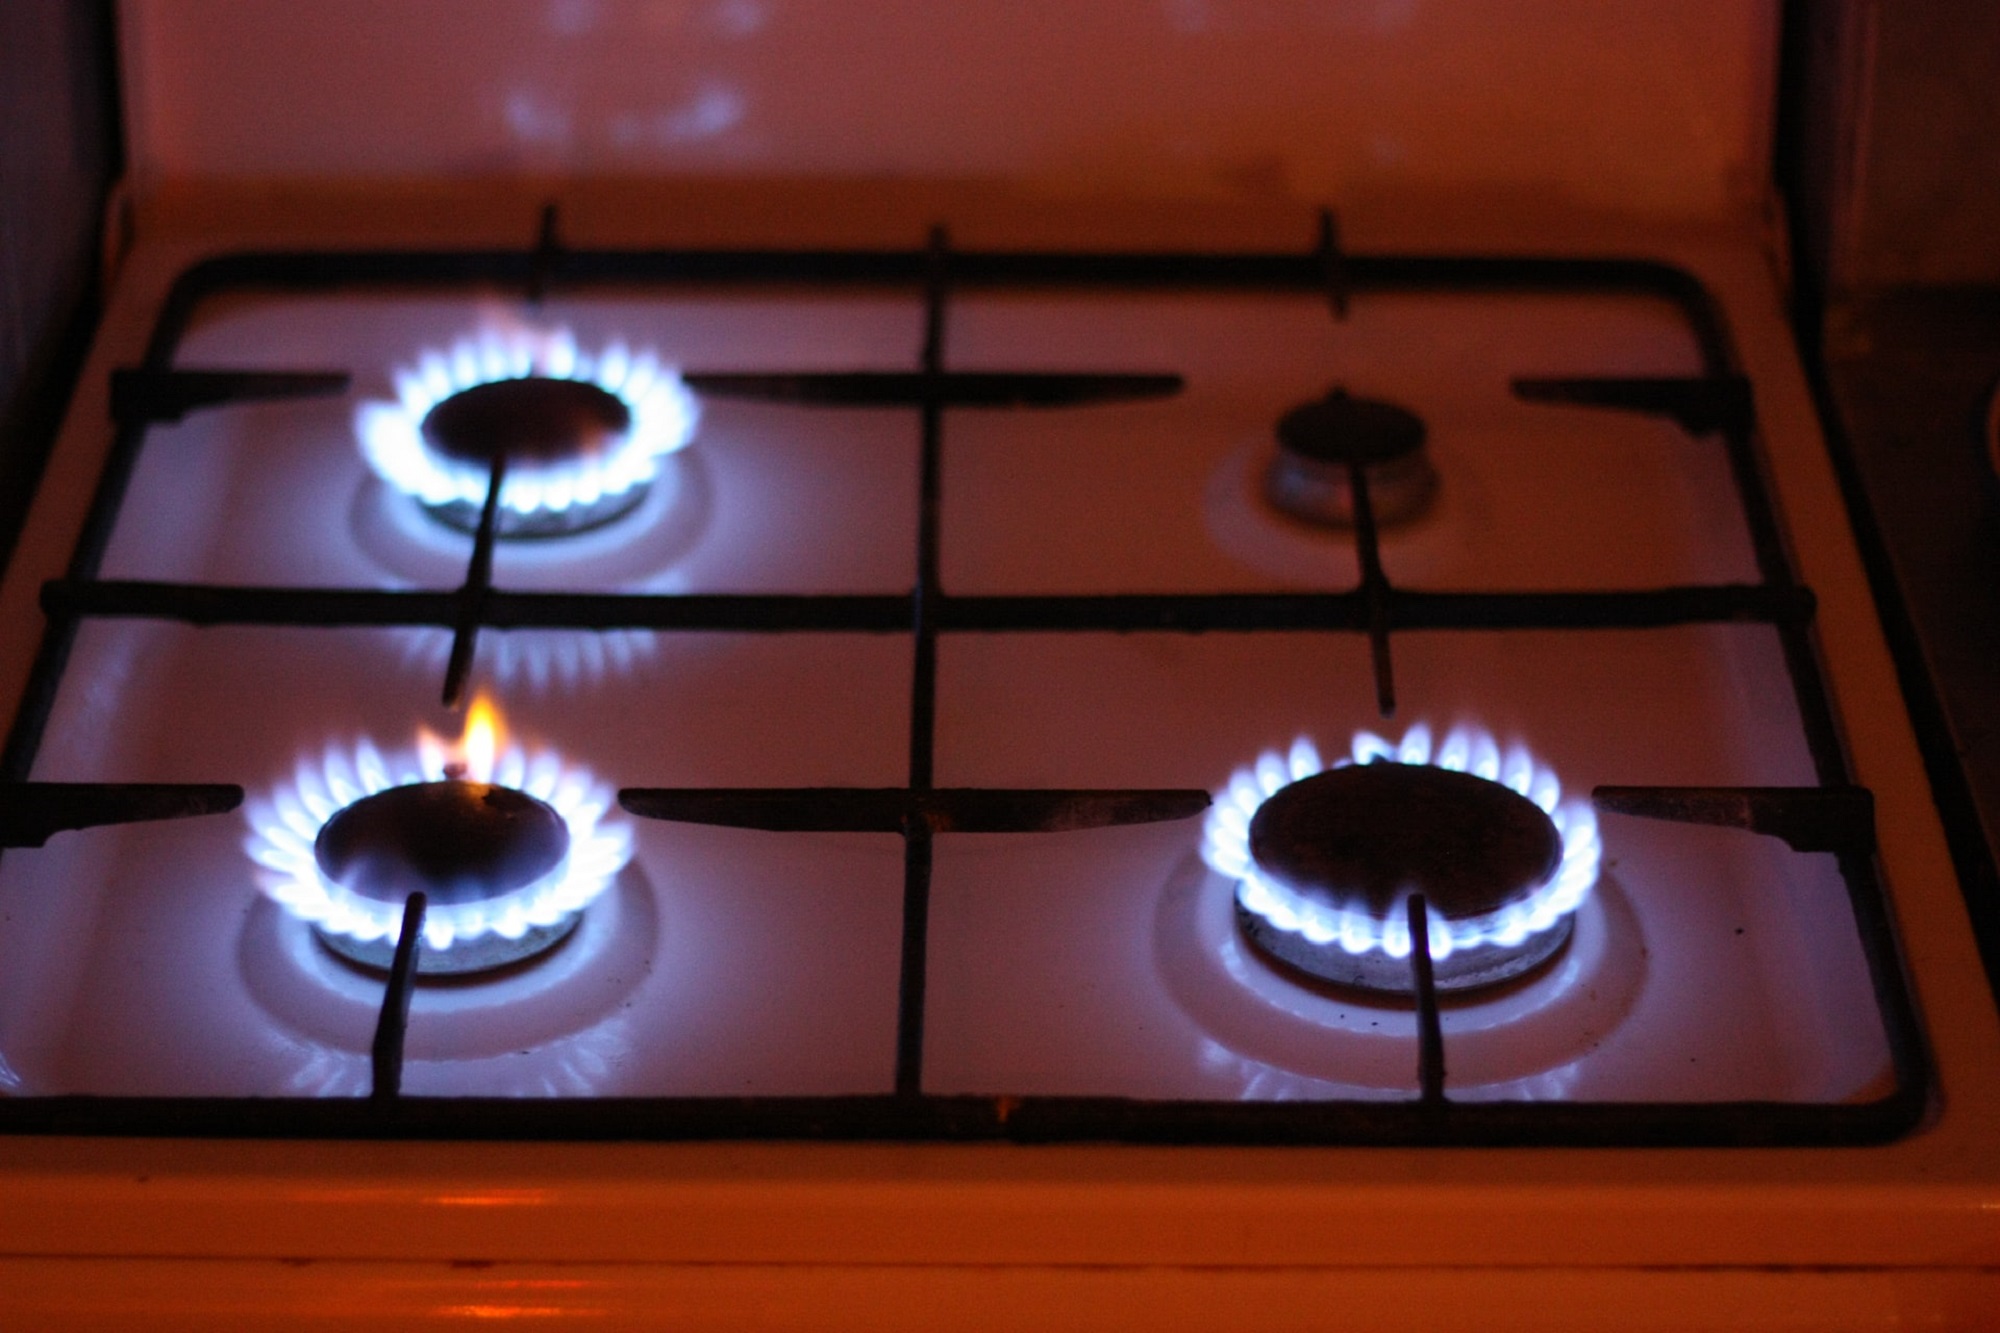 Your gas stove could be hurting everyone around you